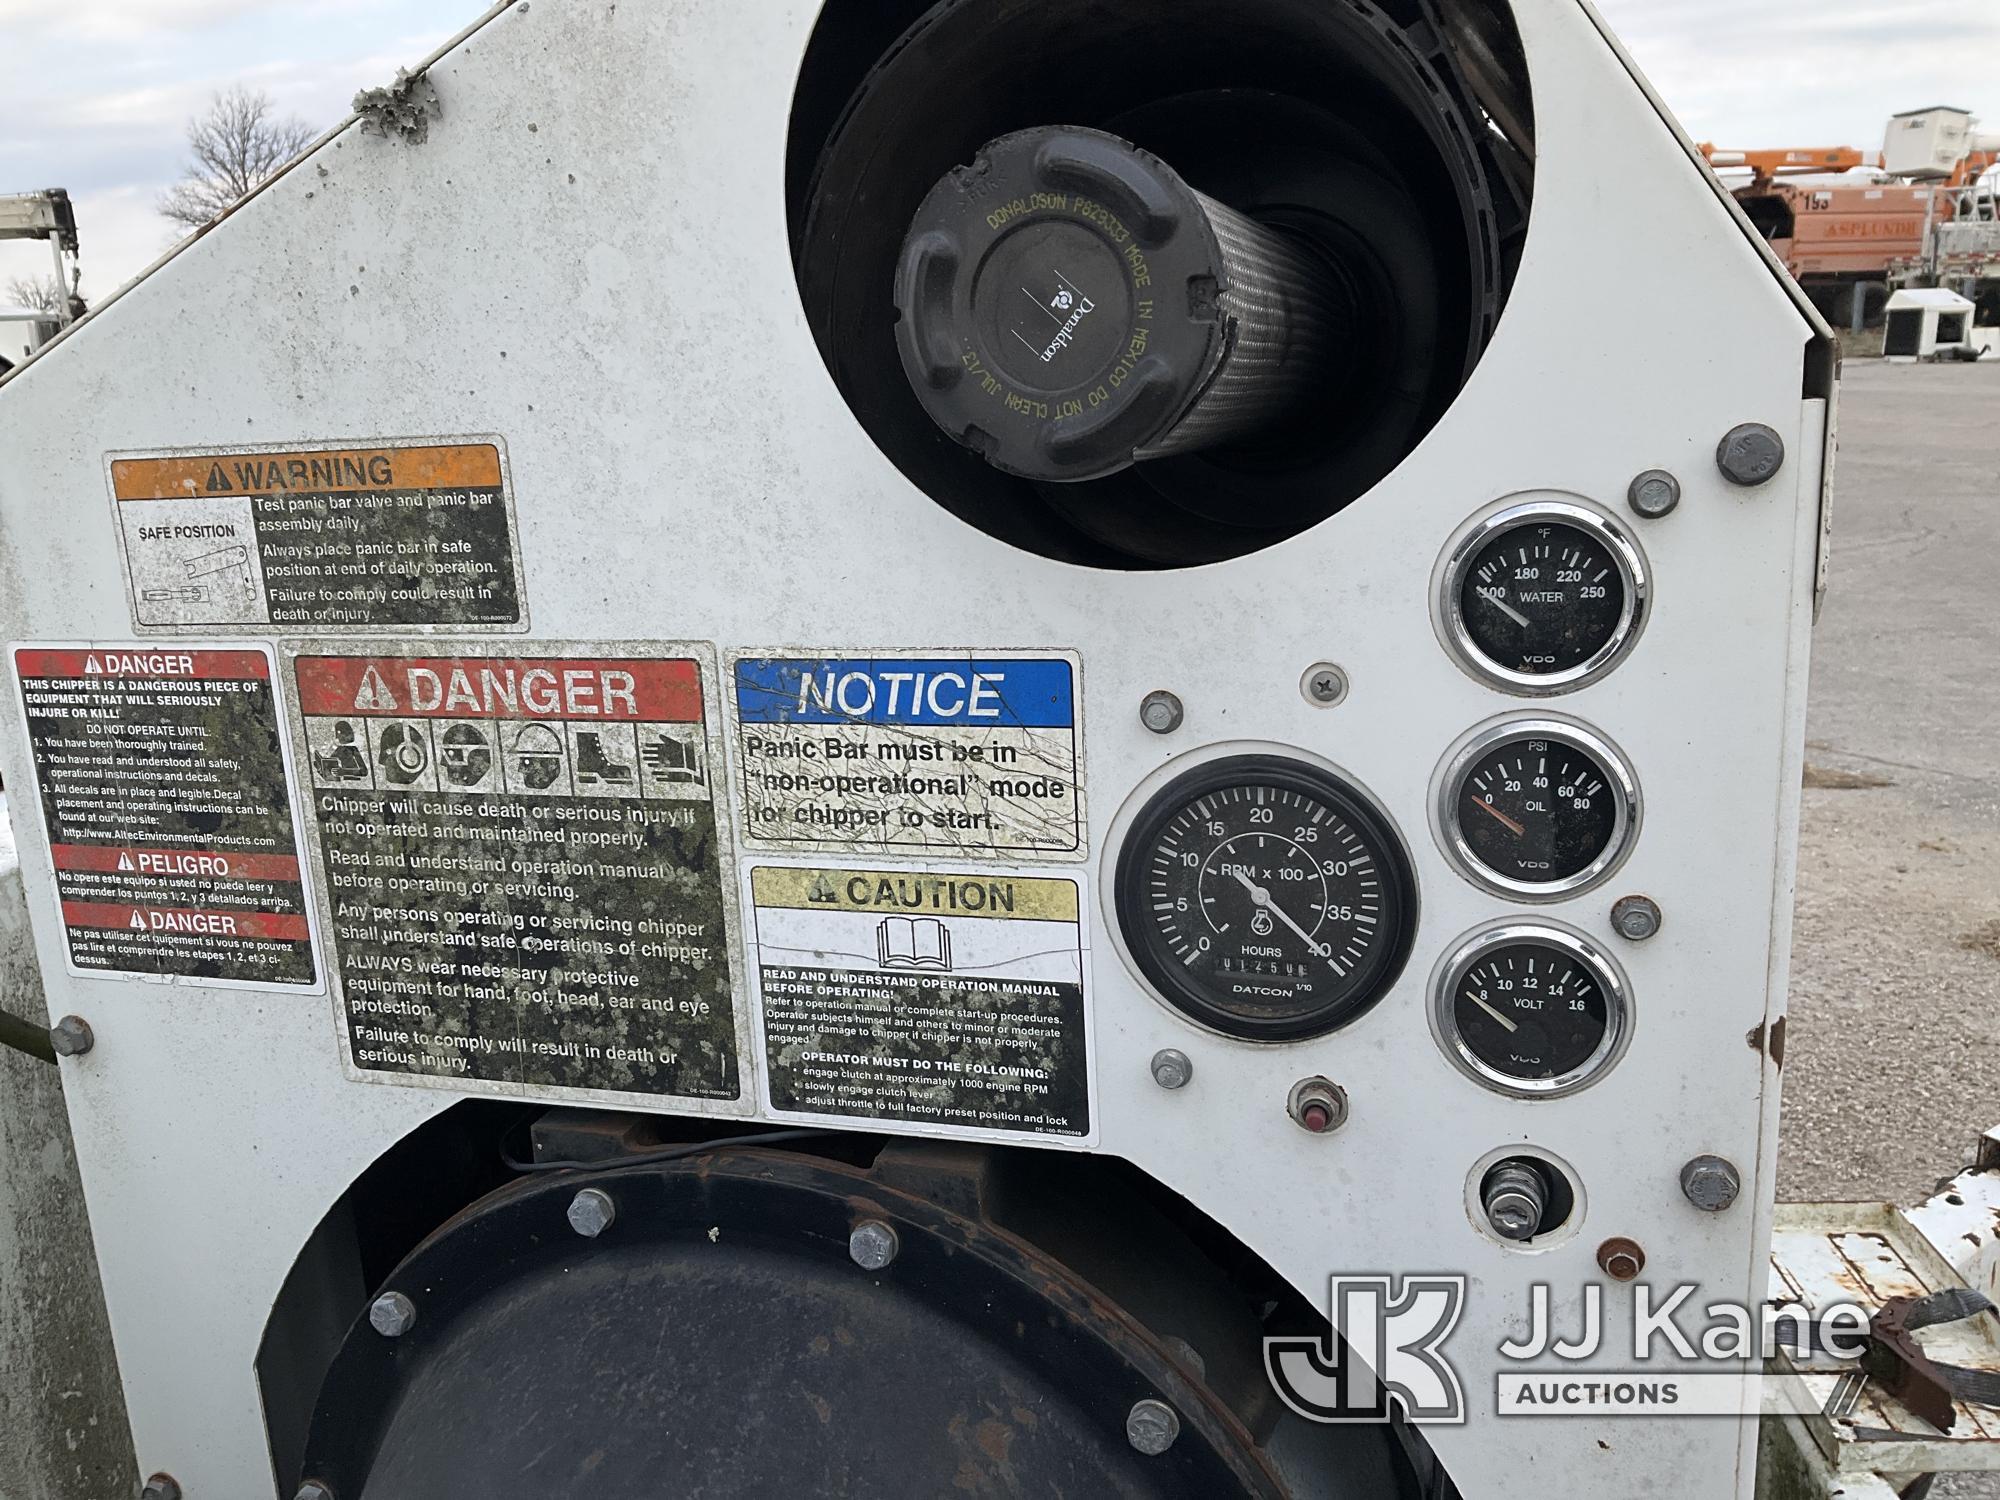 (Kansas City, MO) 2007 Altec DC1217 Chipper (12in Disc) Not Running, Condition Unknown